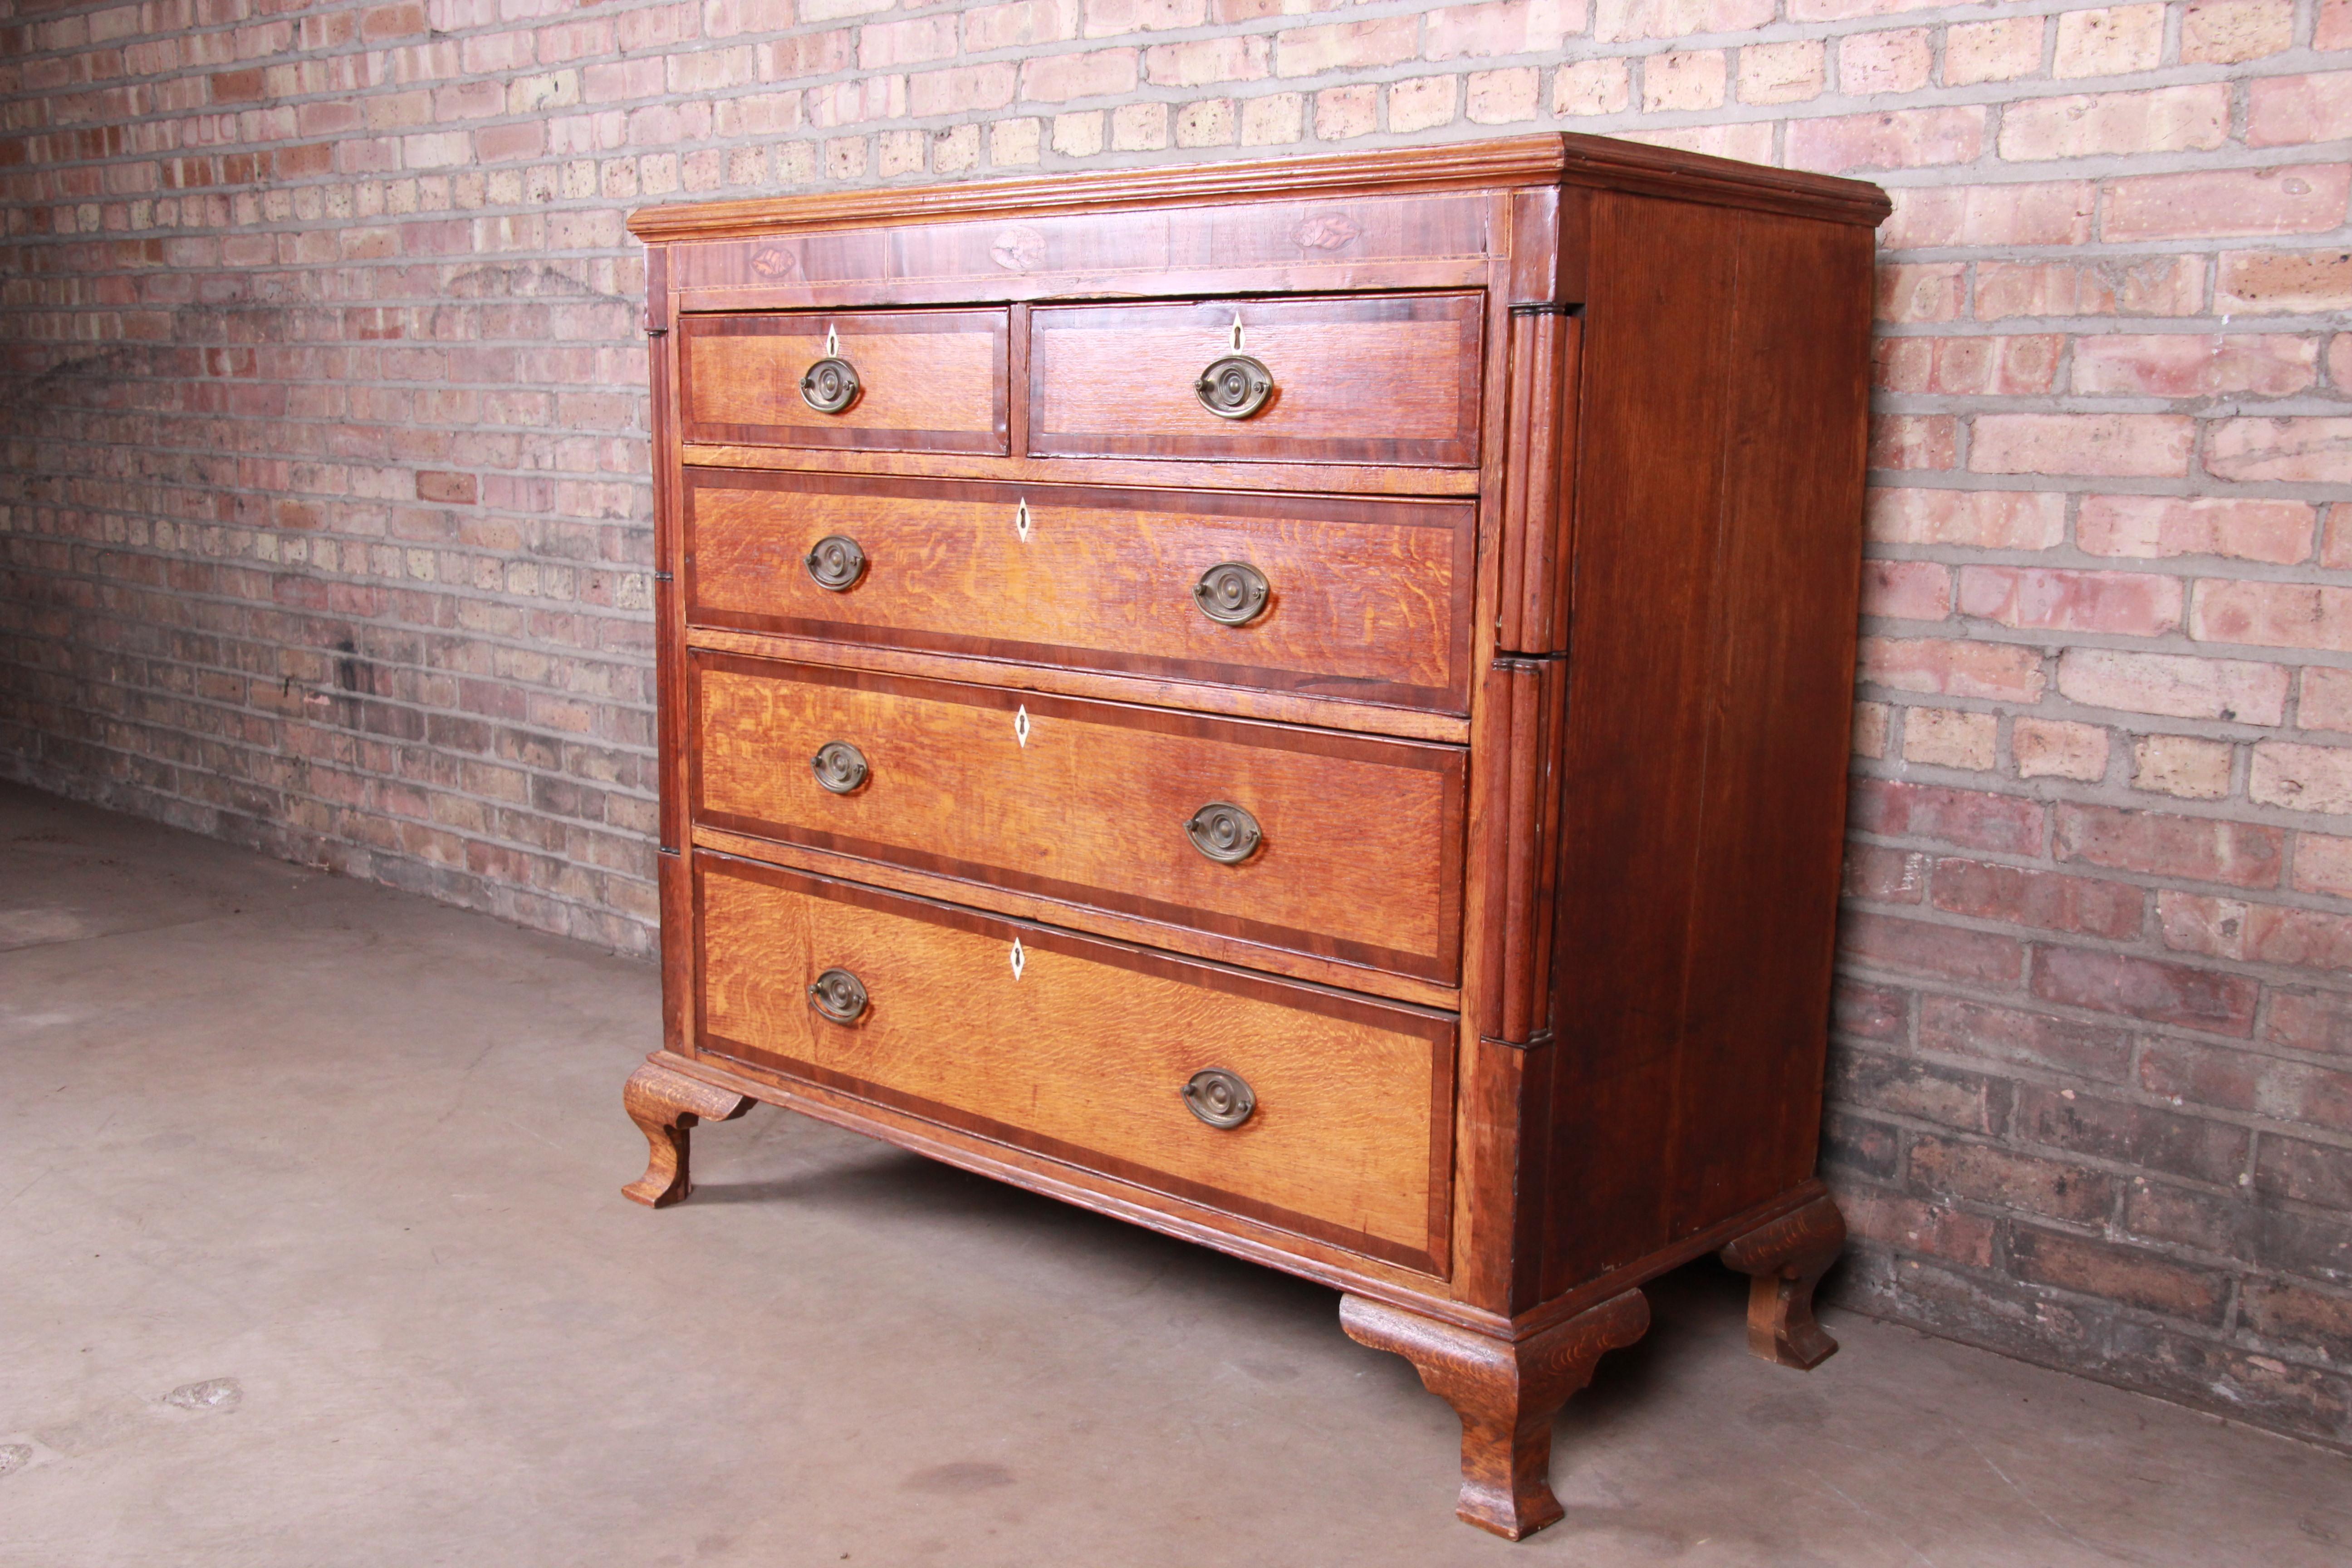 American Colonial Early American Oak, Inlaid Mahogany, and Bone Inlay Chest of Drawers, circa 1820